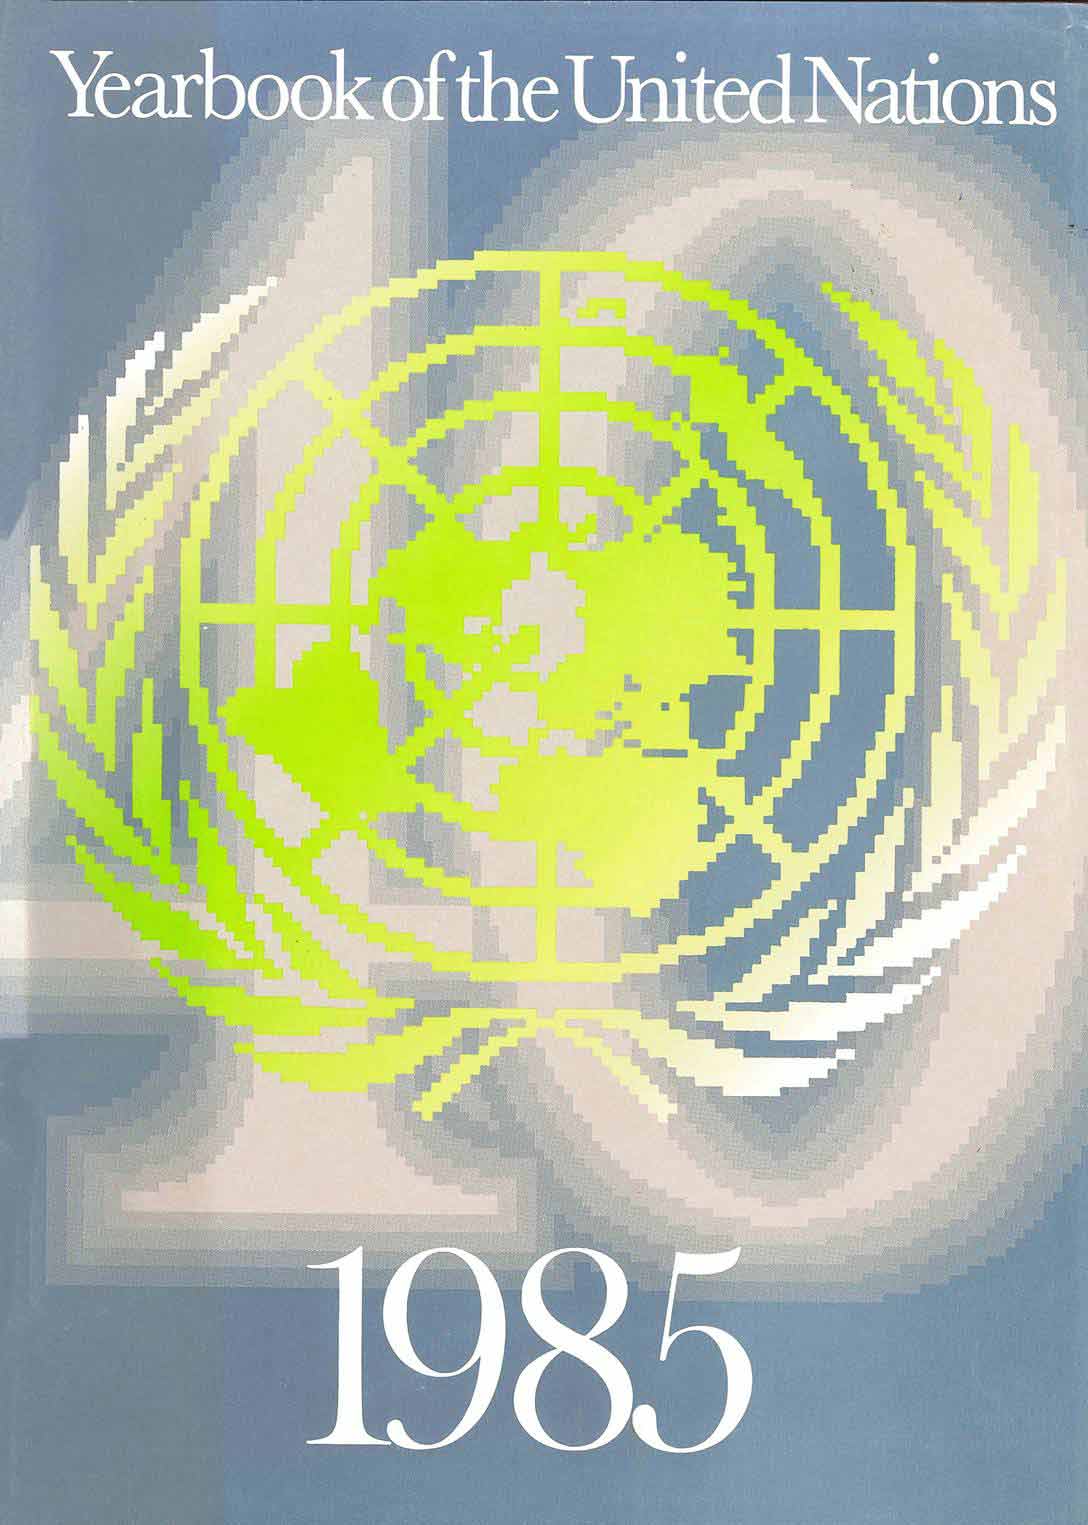 image of Yearbook of the United Nations 1985